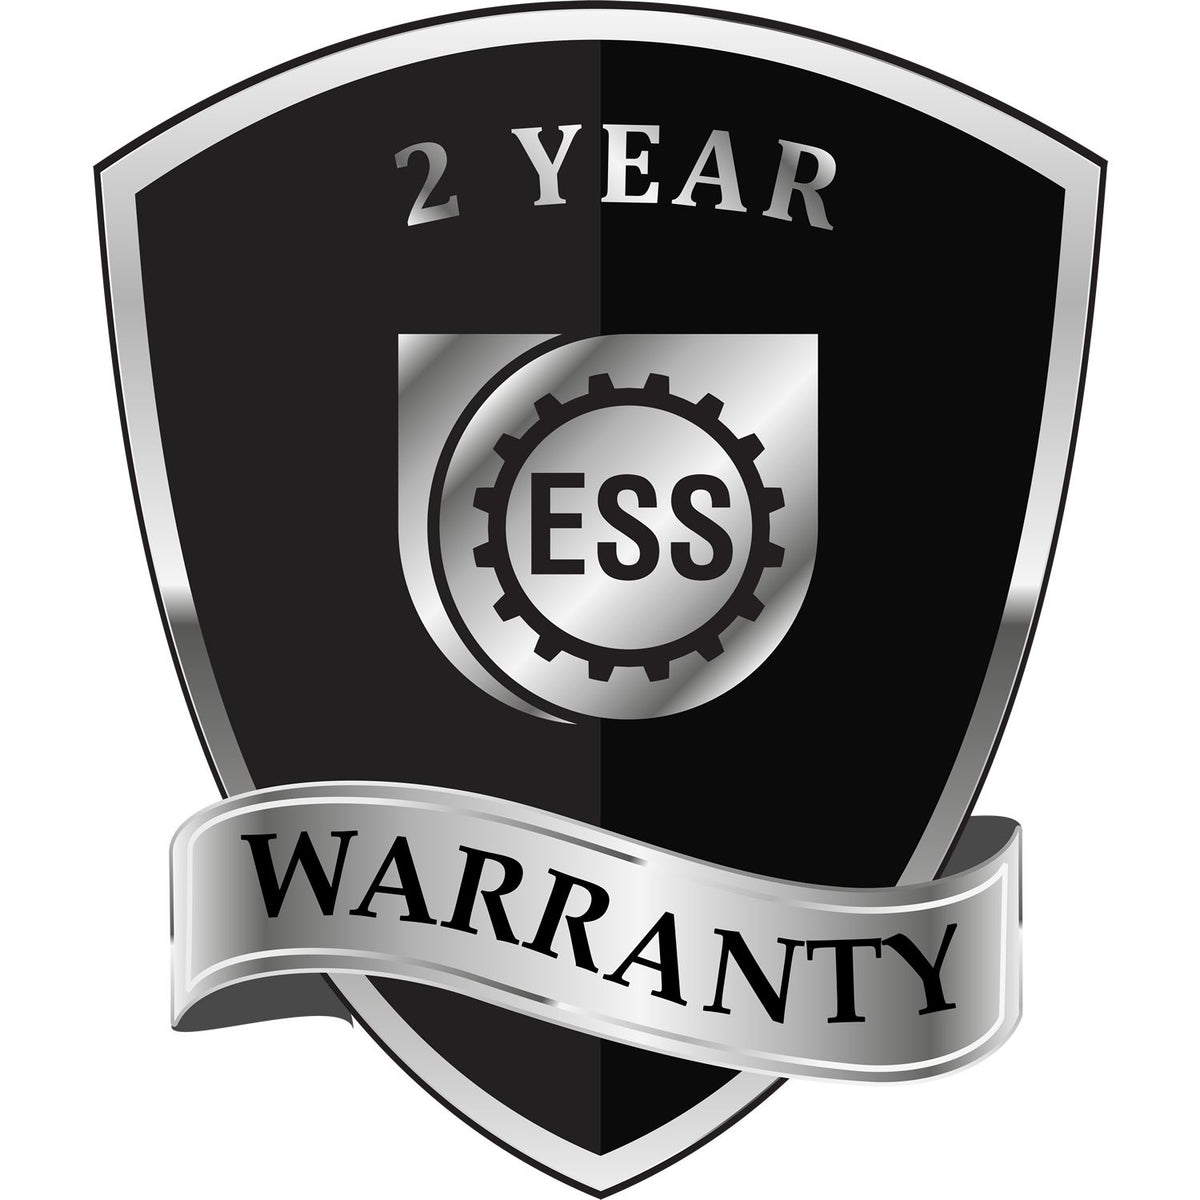 A badge or emblem showing a warranty icon for the Handheld Iowa Land Surveyor Seal